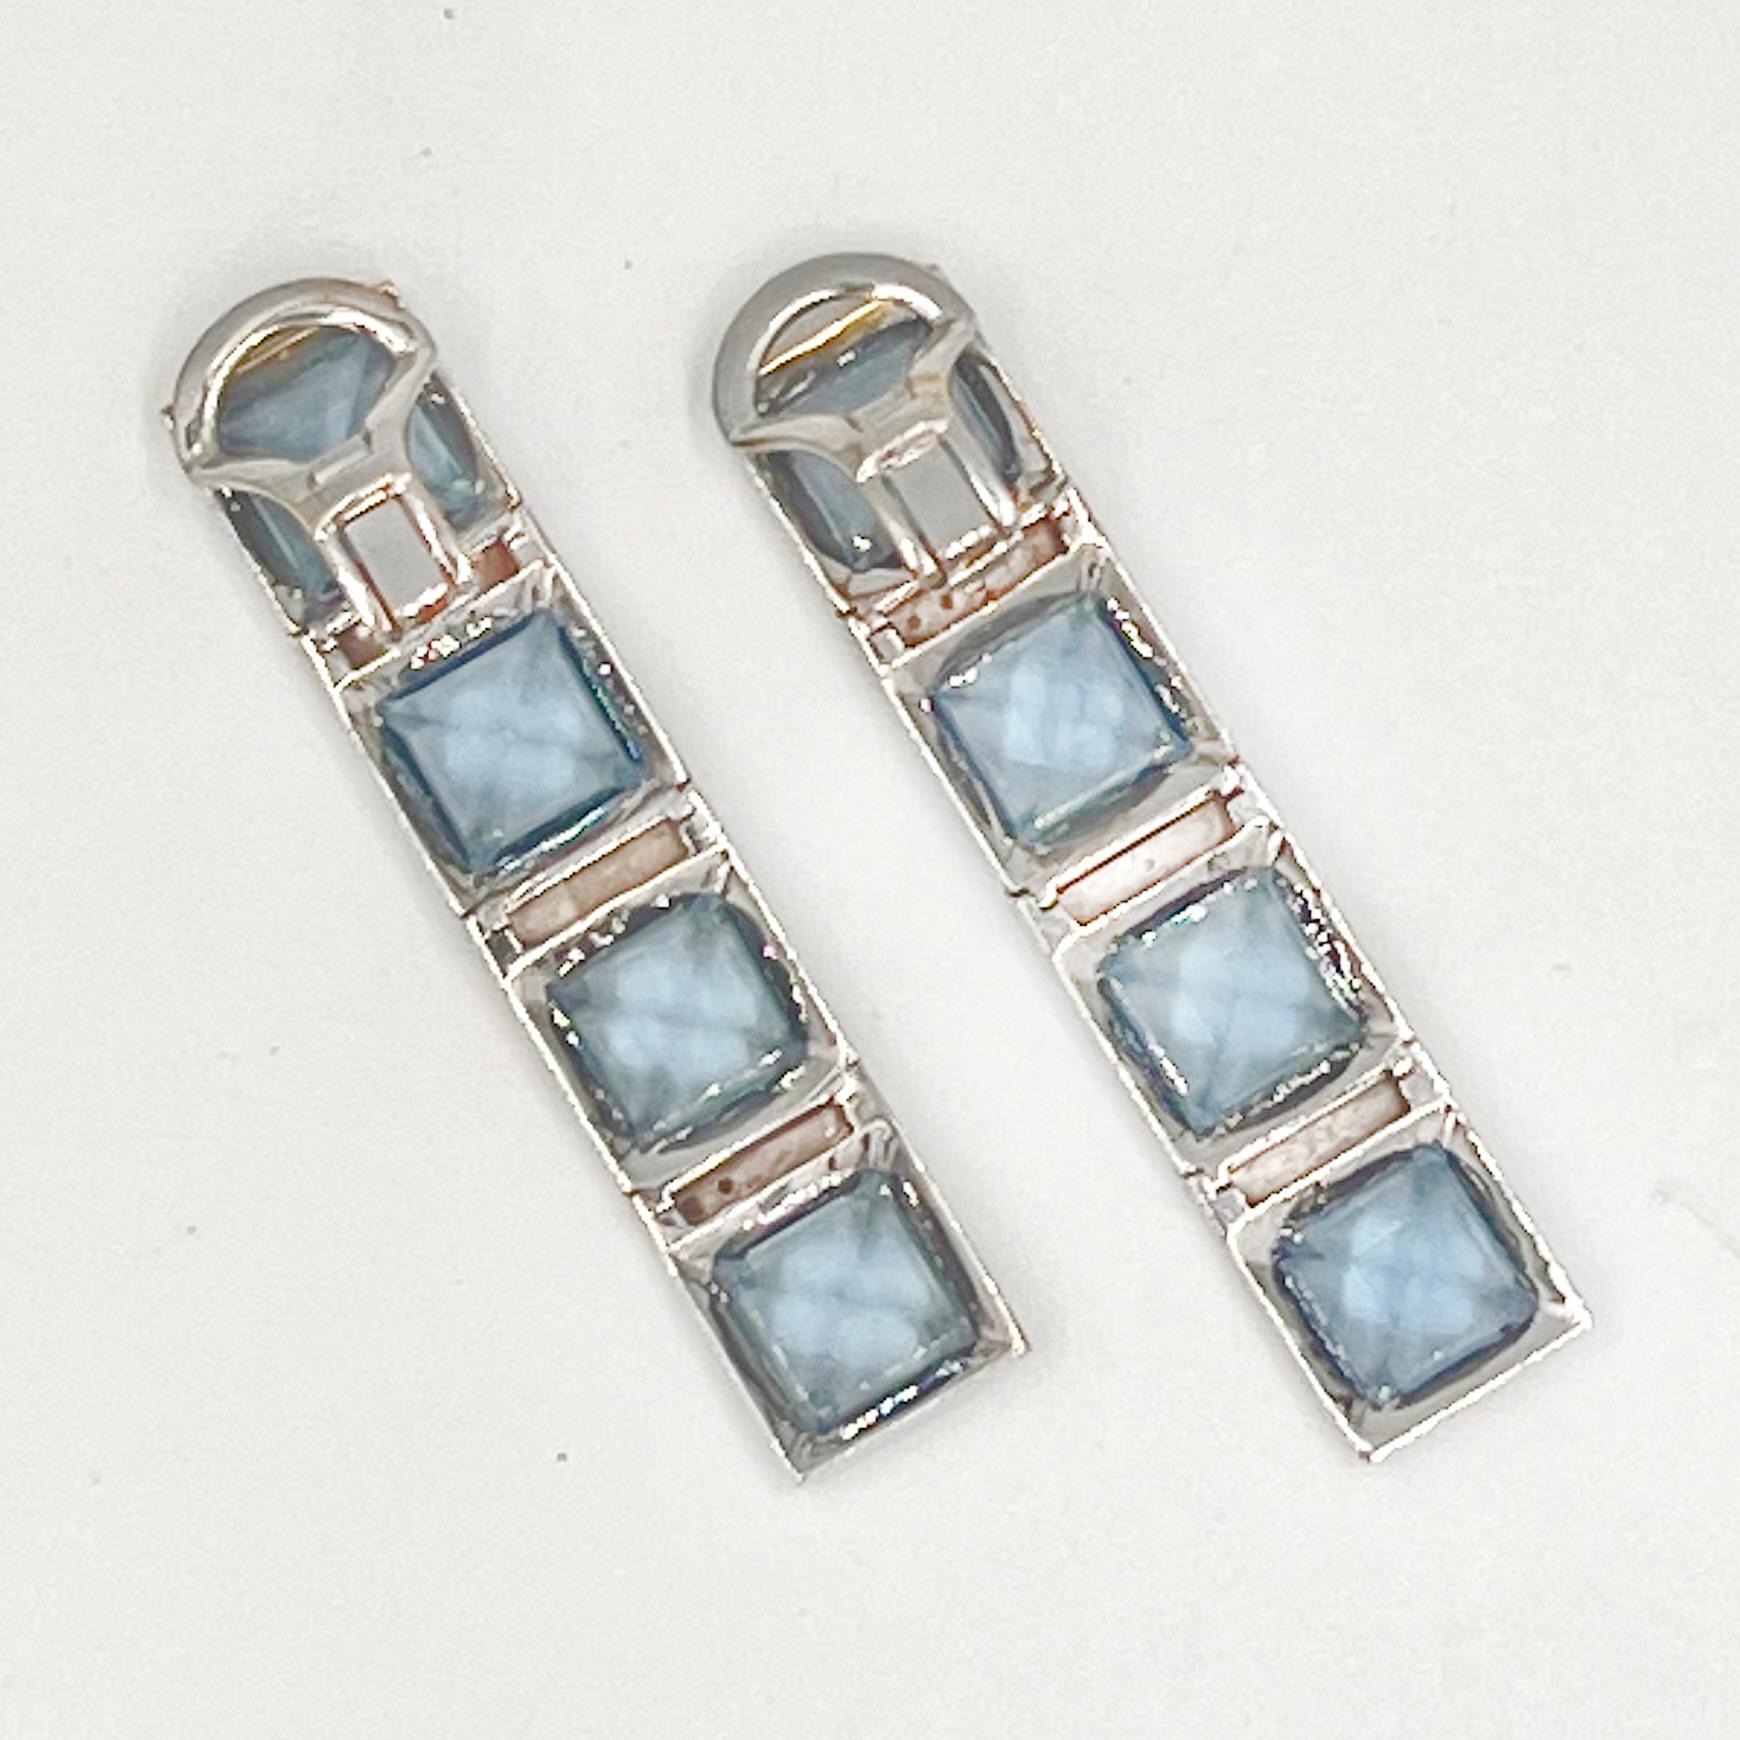 Peggy Stephaich Guinness Blue Topaz Diamond Tile Earrings In Excellent Condition For Sale In Palm Beach, FL